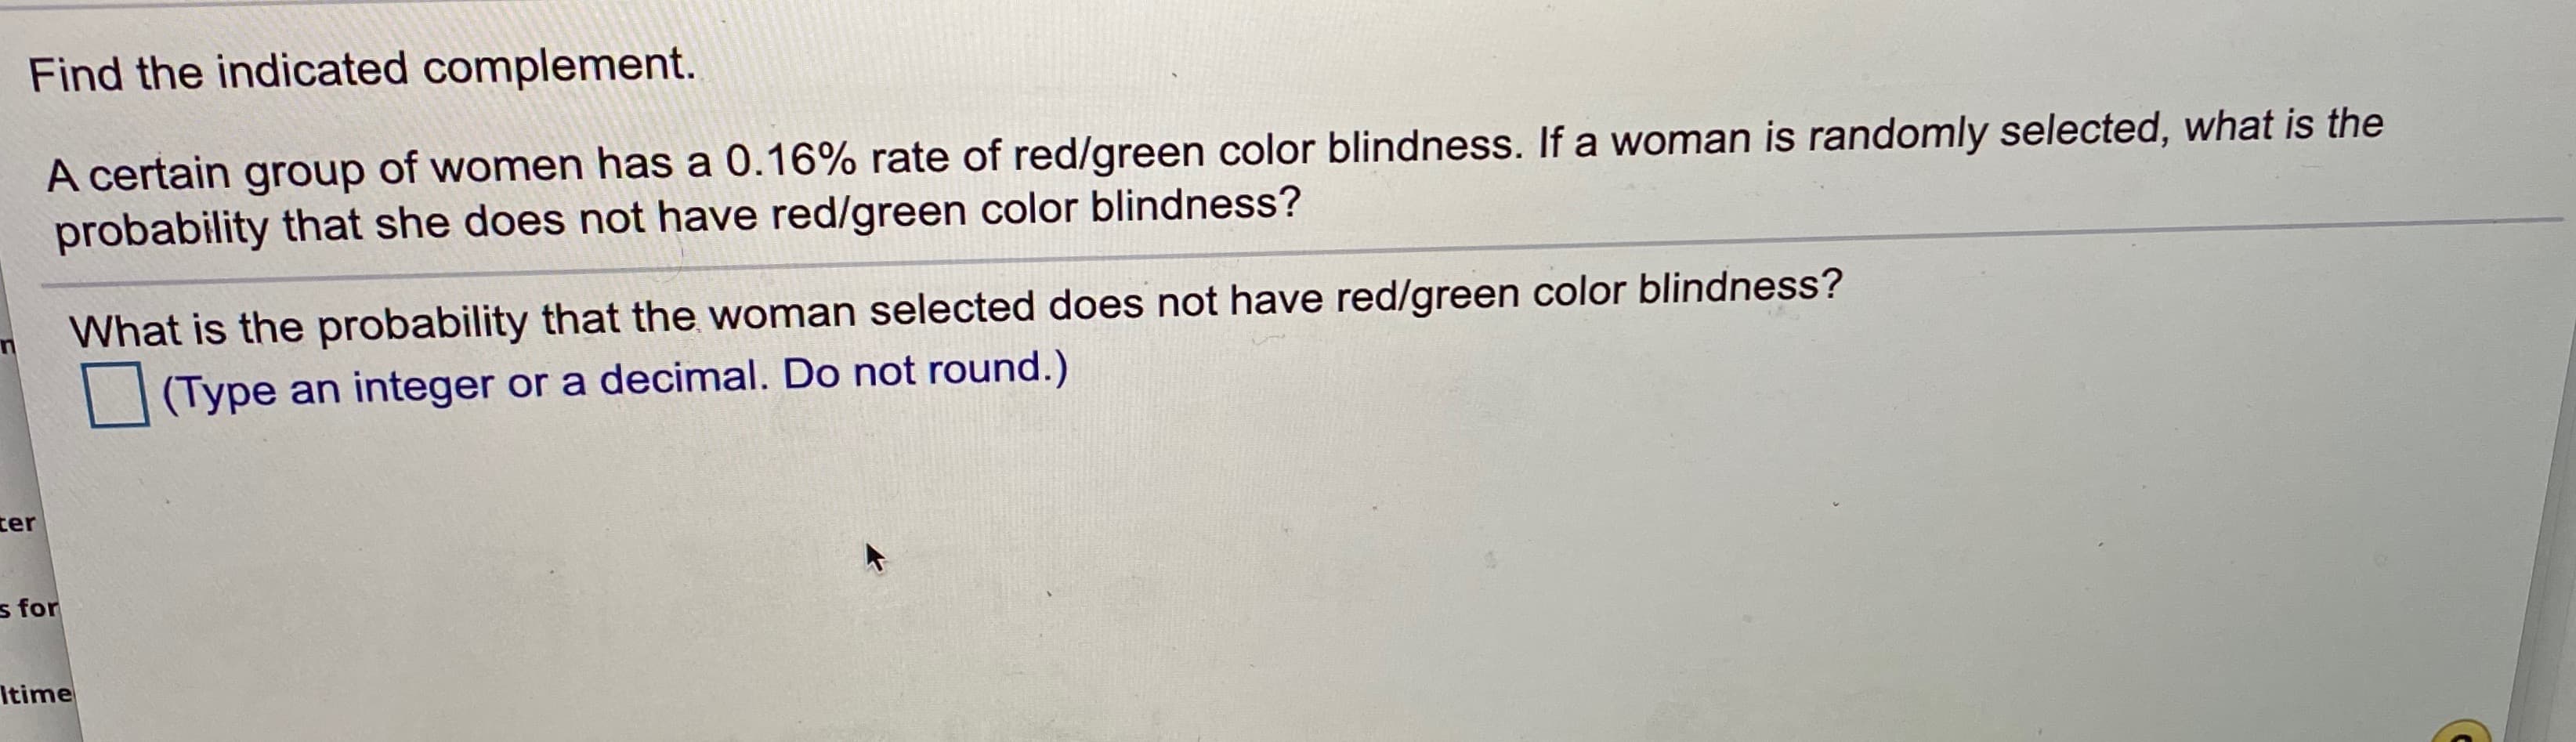 Find the indicated complement.
A certain group of women has a 0.16% rate of red/green color blindness. If a woman is randomly selected, what is the
probability that she does not have red/green color blindness?
What is the probability that the woman selected does not have red/green color blindness?
(Type an integer or a decimal. Do not round.)
ter
s for
Itime
